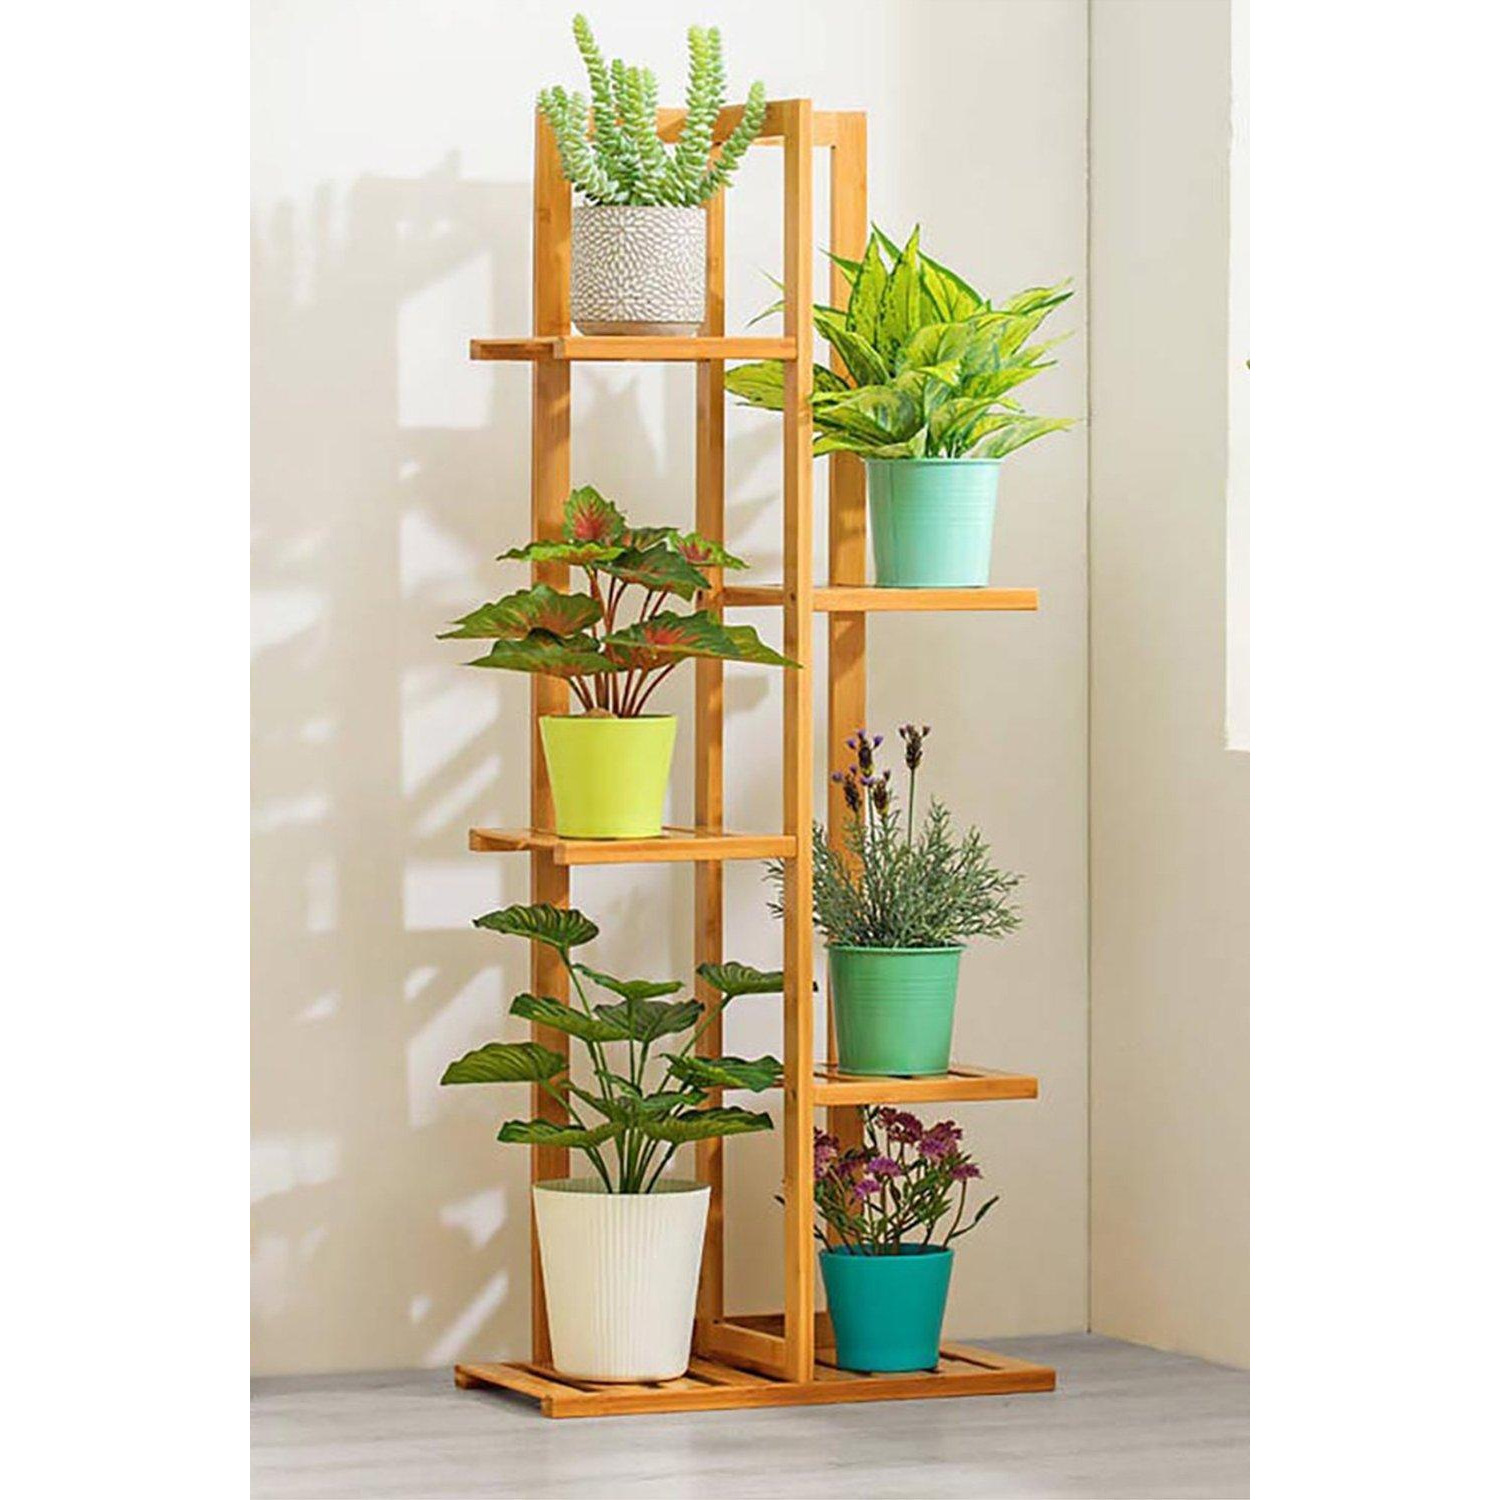 5 Tier Rustic Wooden Multi TieredWatkin Plant Stand - image 1